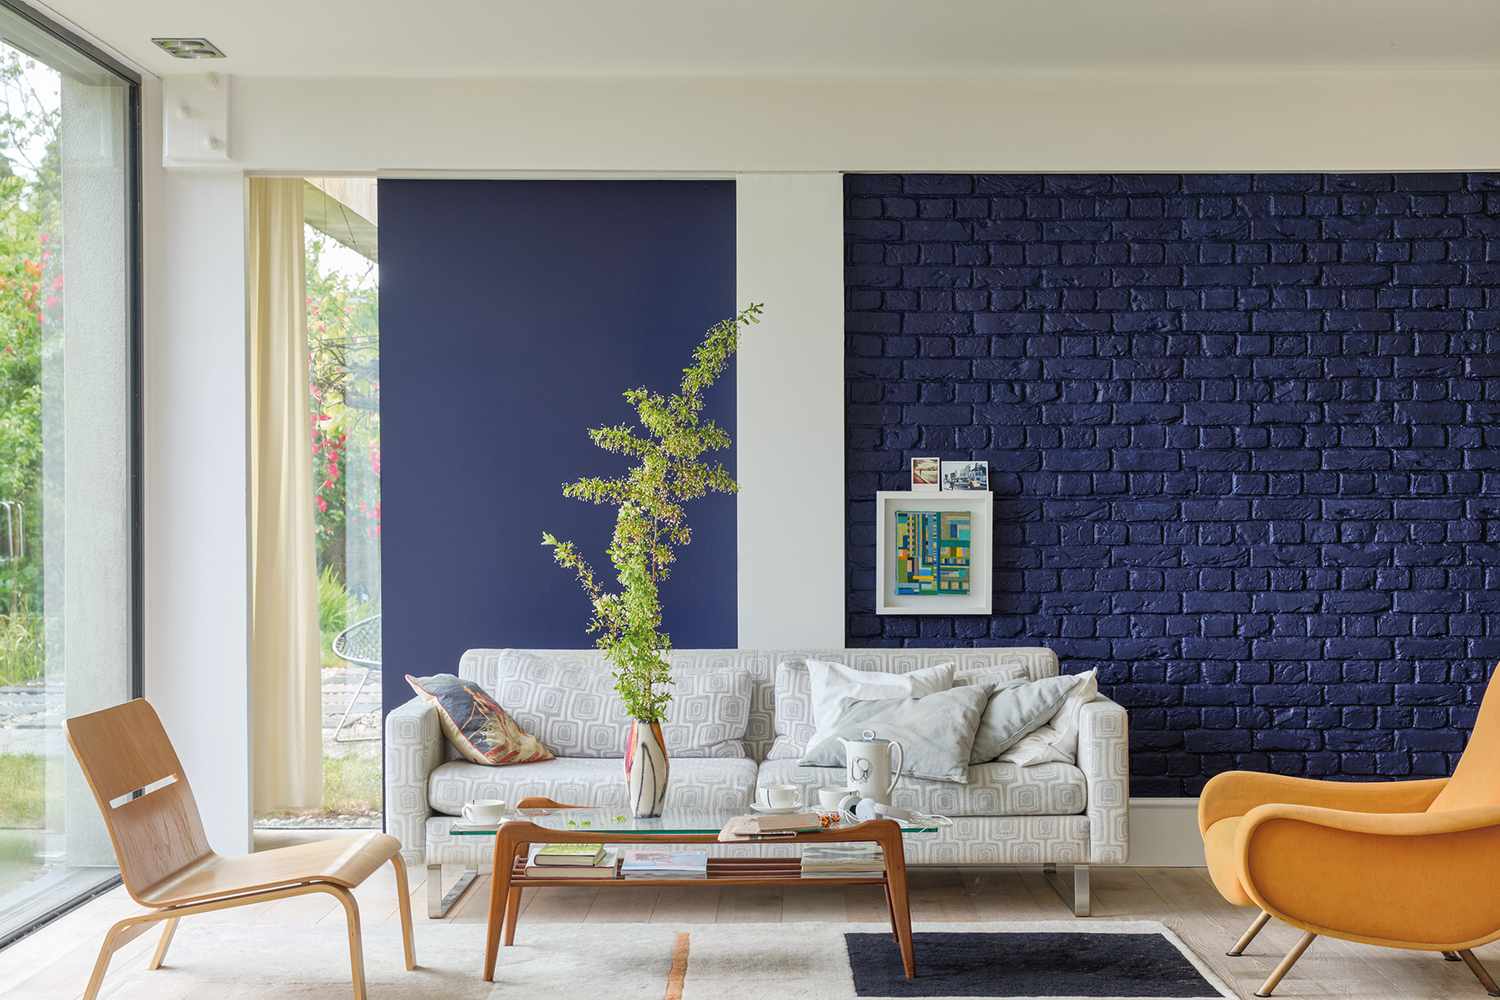 These Will Be the Most Popular Living Room Paint Colors in 2020